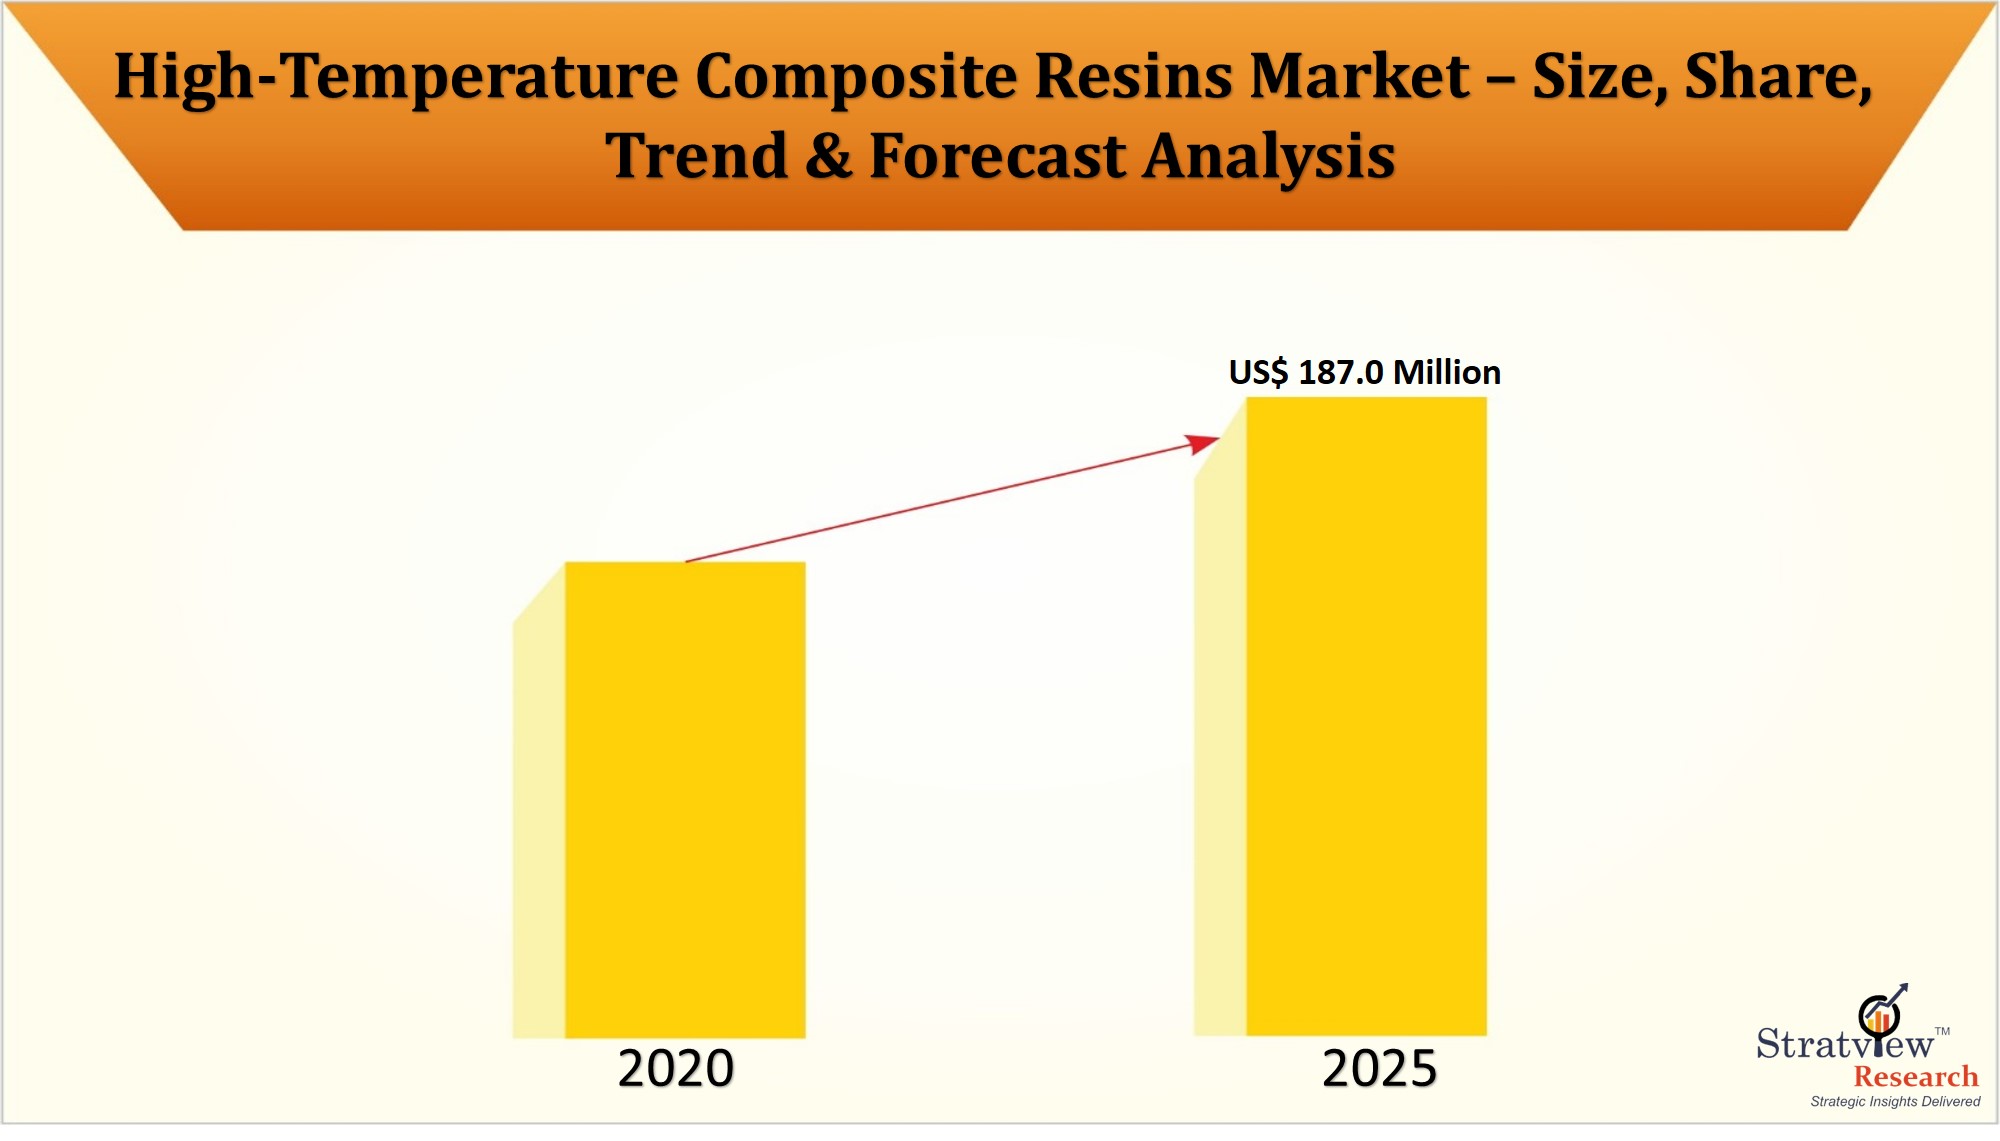 High-Temperature Composite Resins Market to reach US$ 187.0 Million in 2025